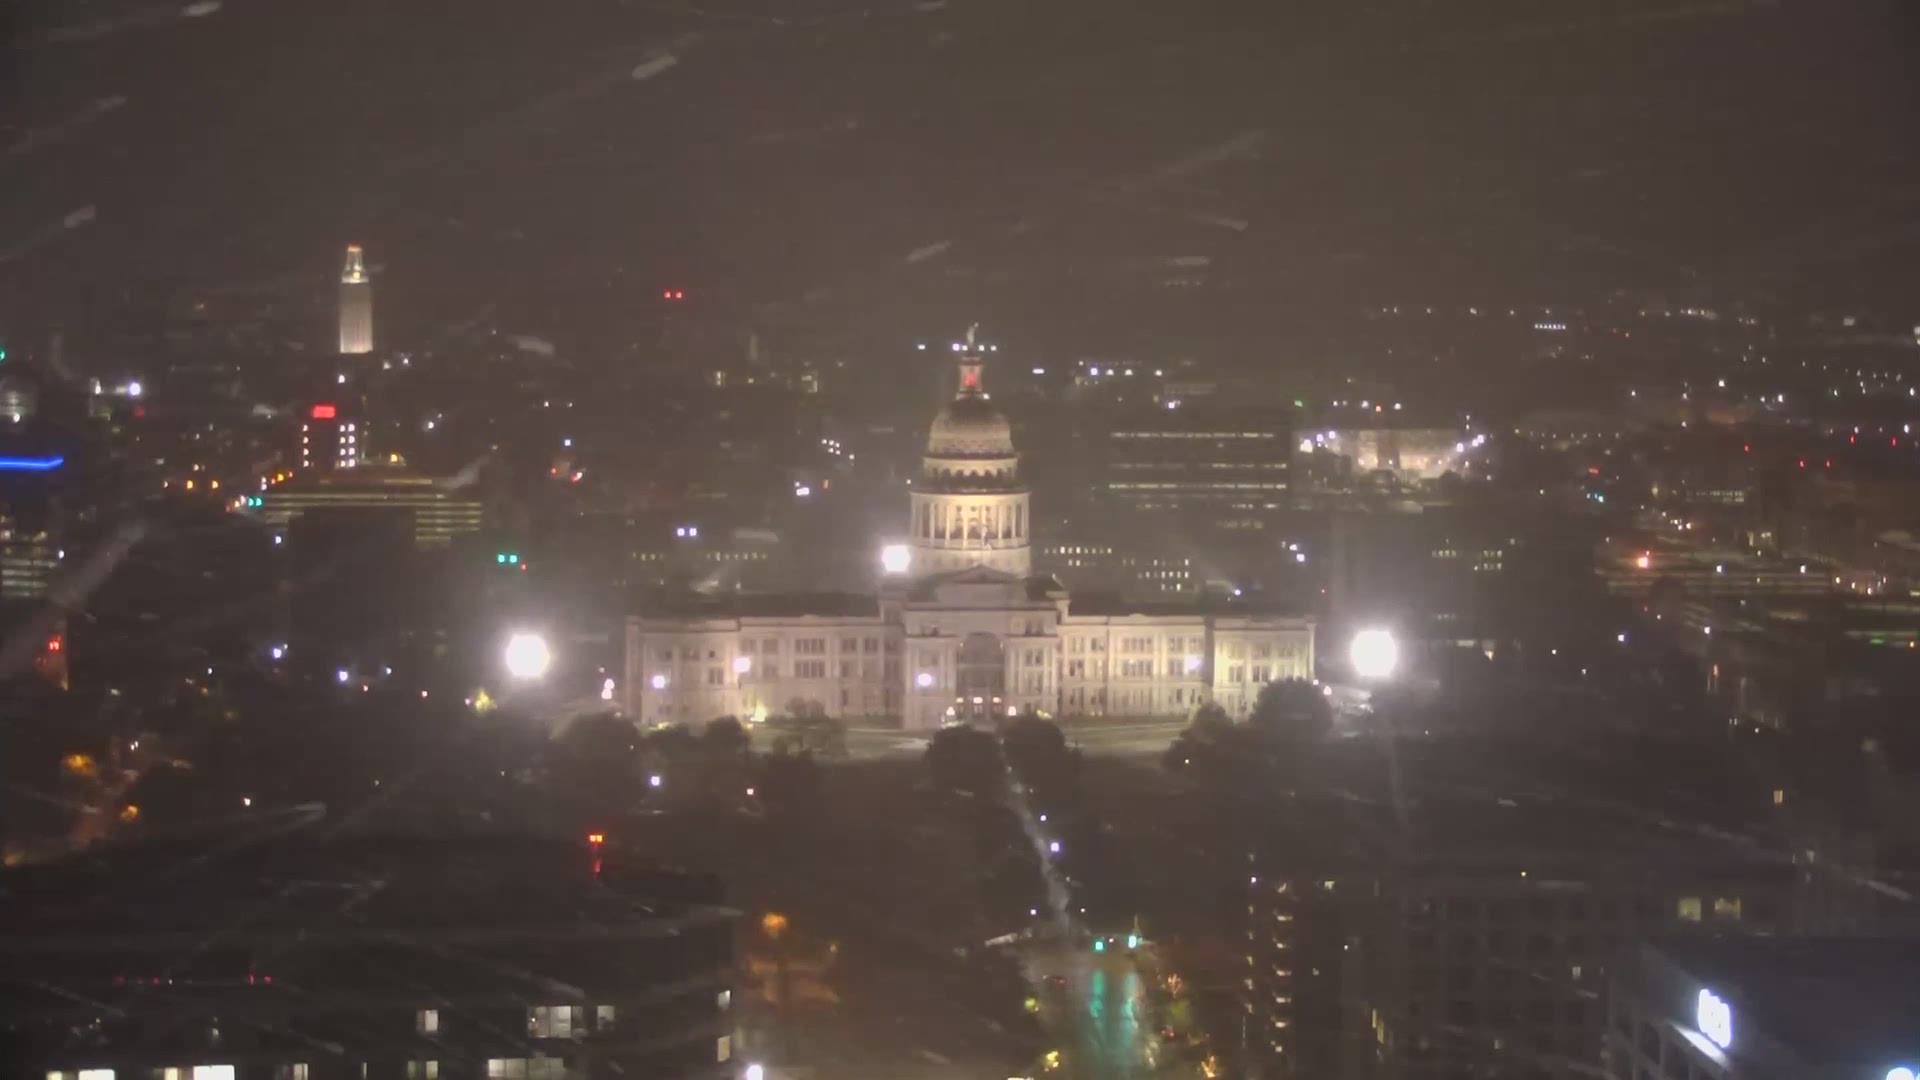 Snow on Wednesday night over Downtown Austin